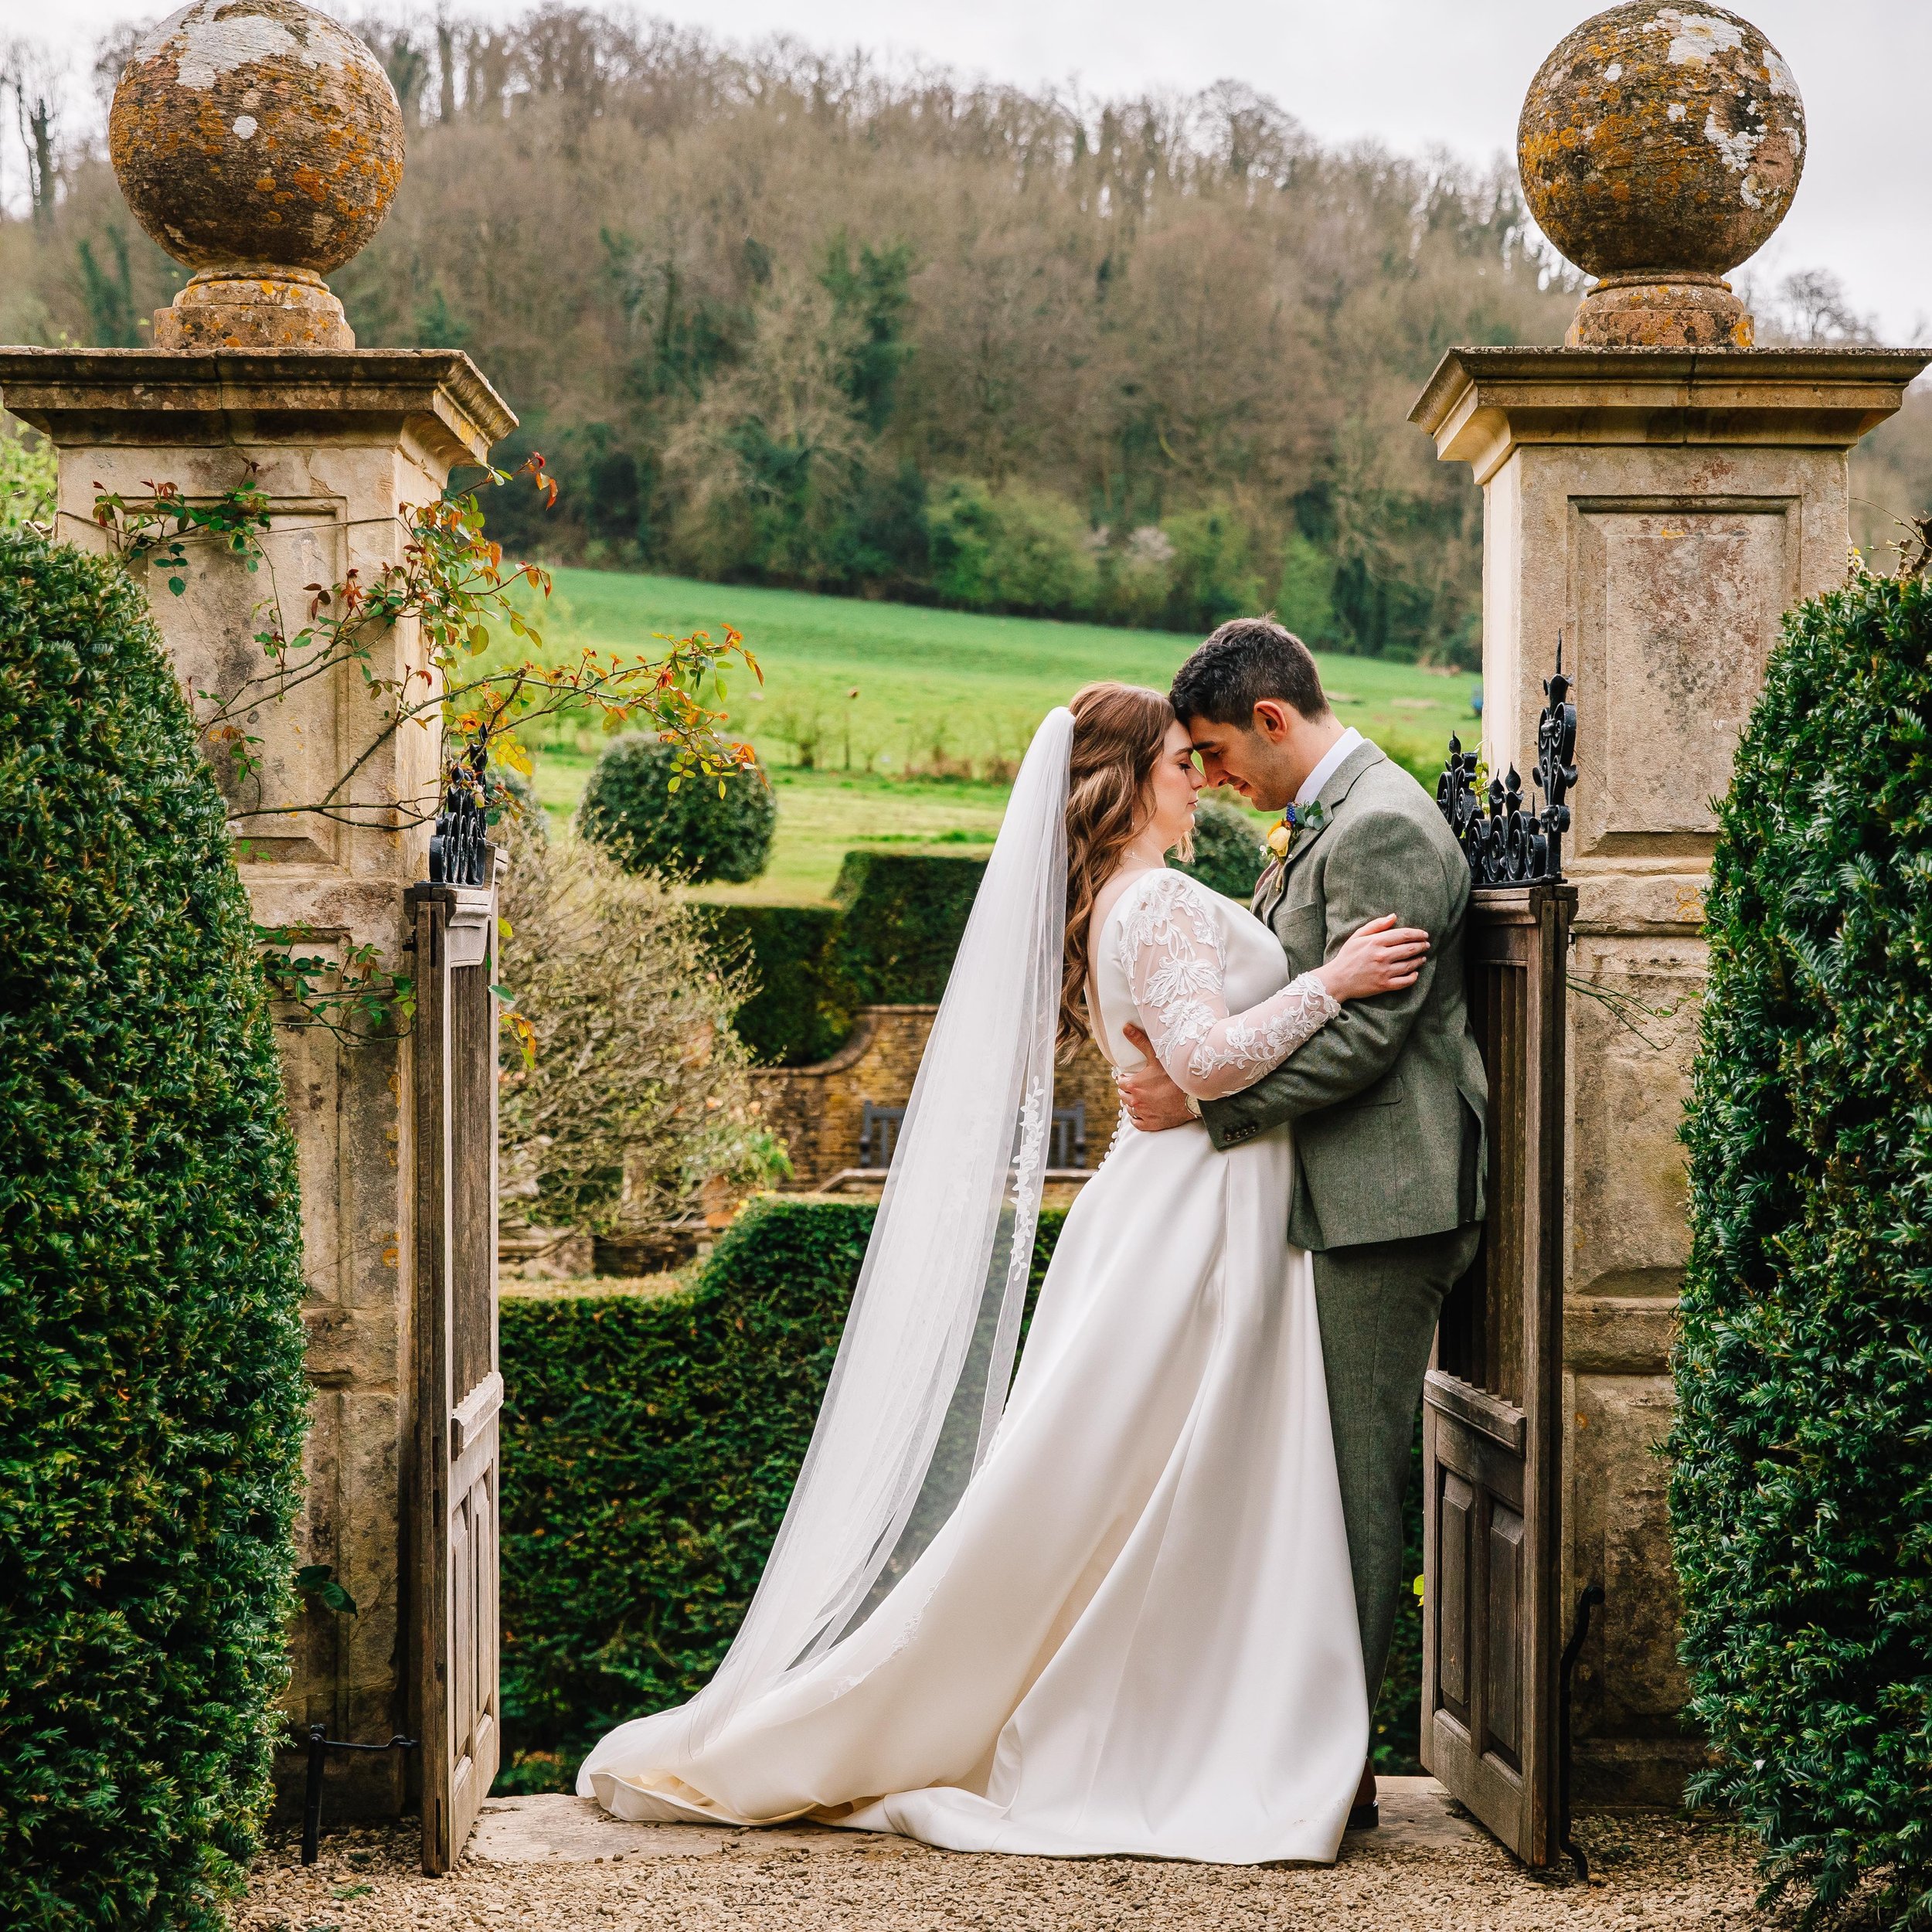 💕This couple&hellip;💕

The most incredible day at @owlpenmanor 

#weddingday #brideandgroom #owlpenmanor #cotswoldwedding